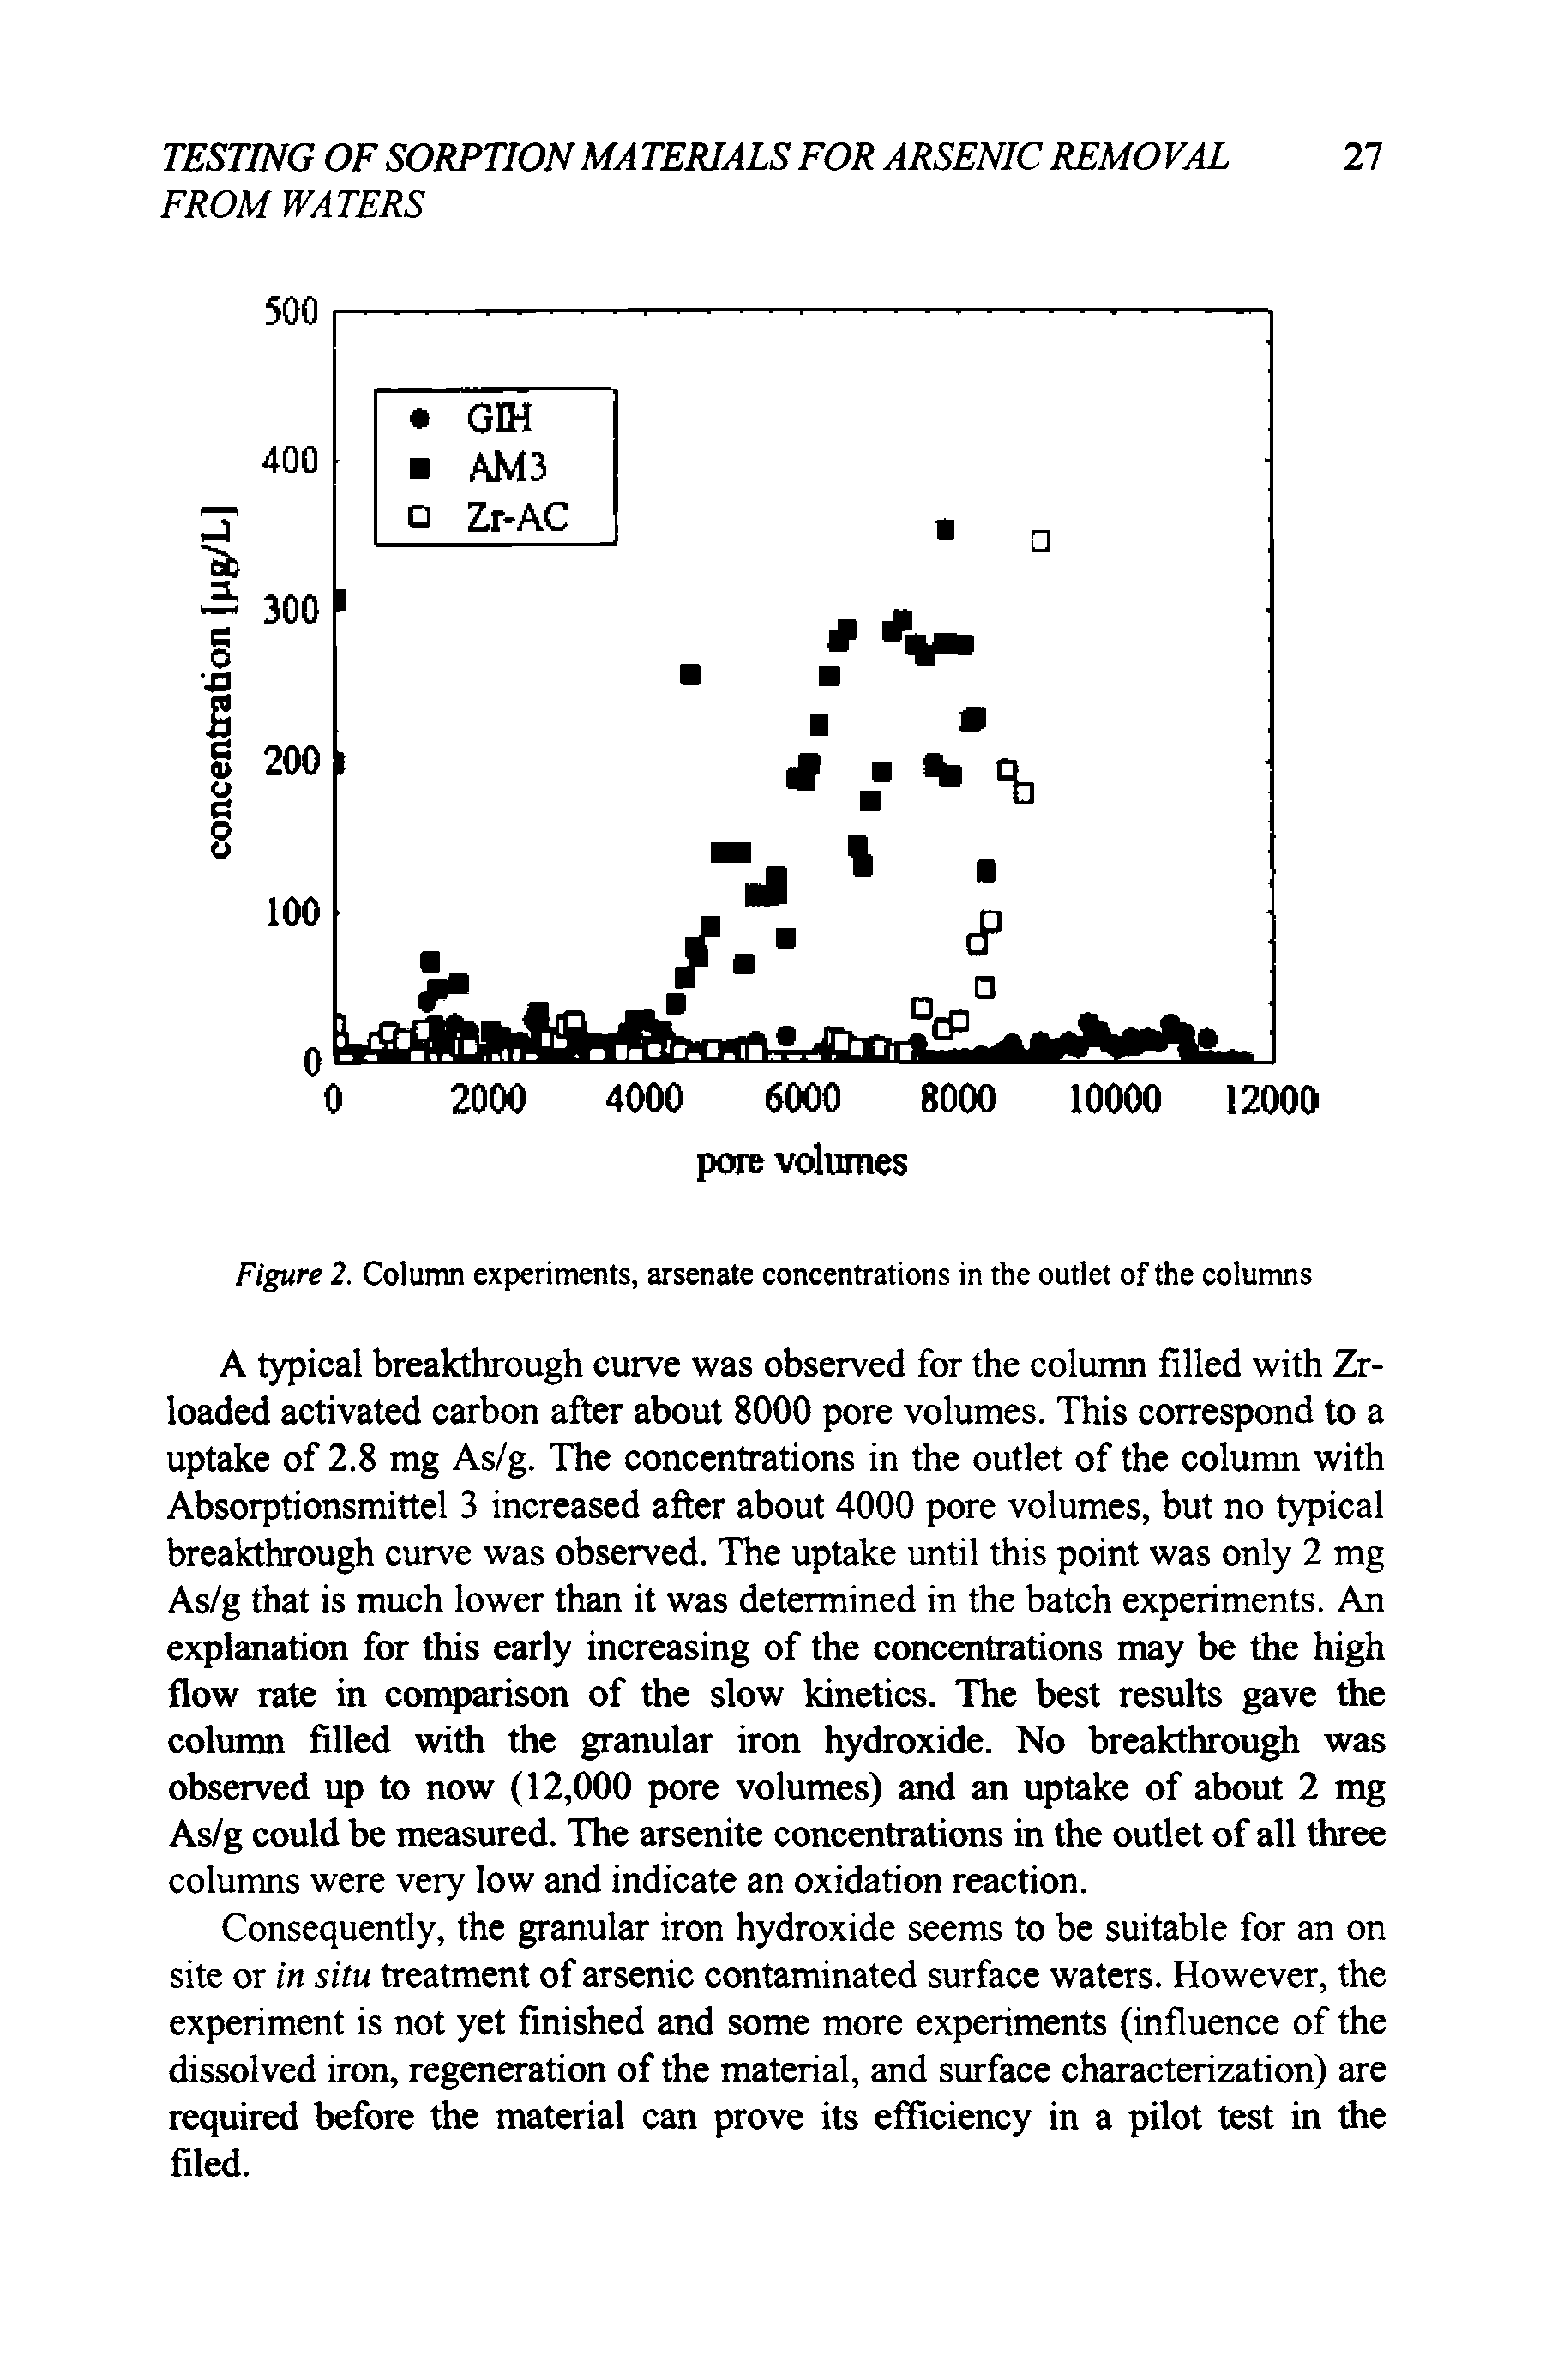 Figure 2. Column experiments, arsenate concentrations in the outlet of the columns...